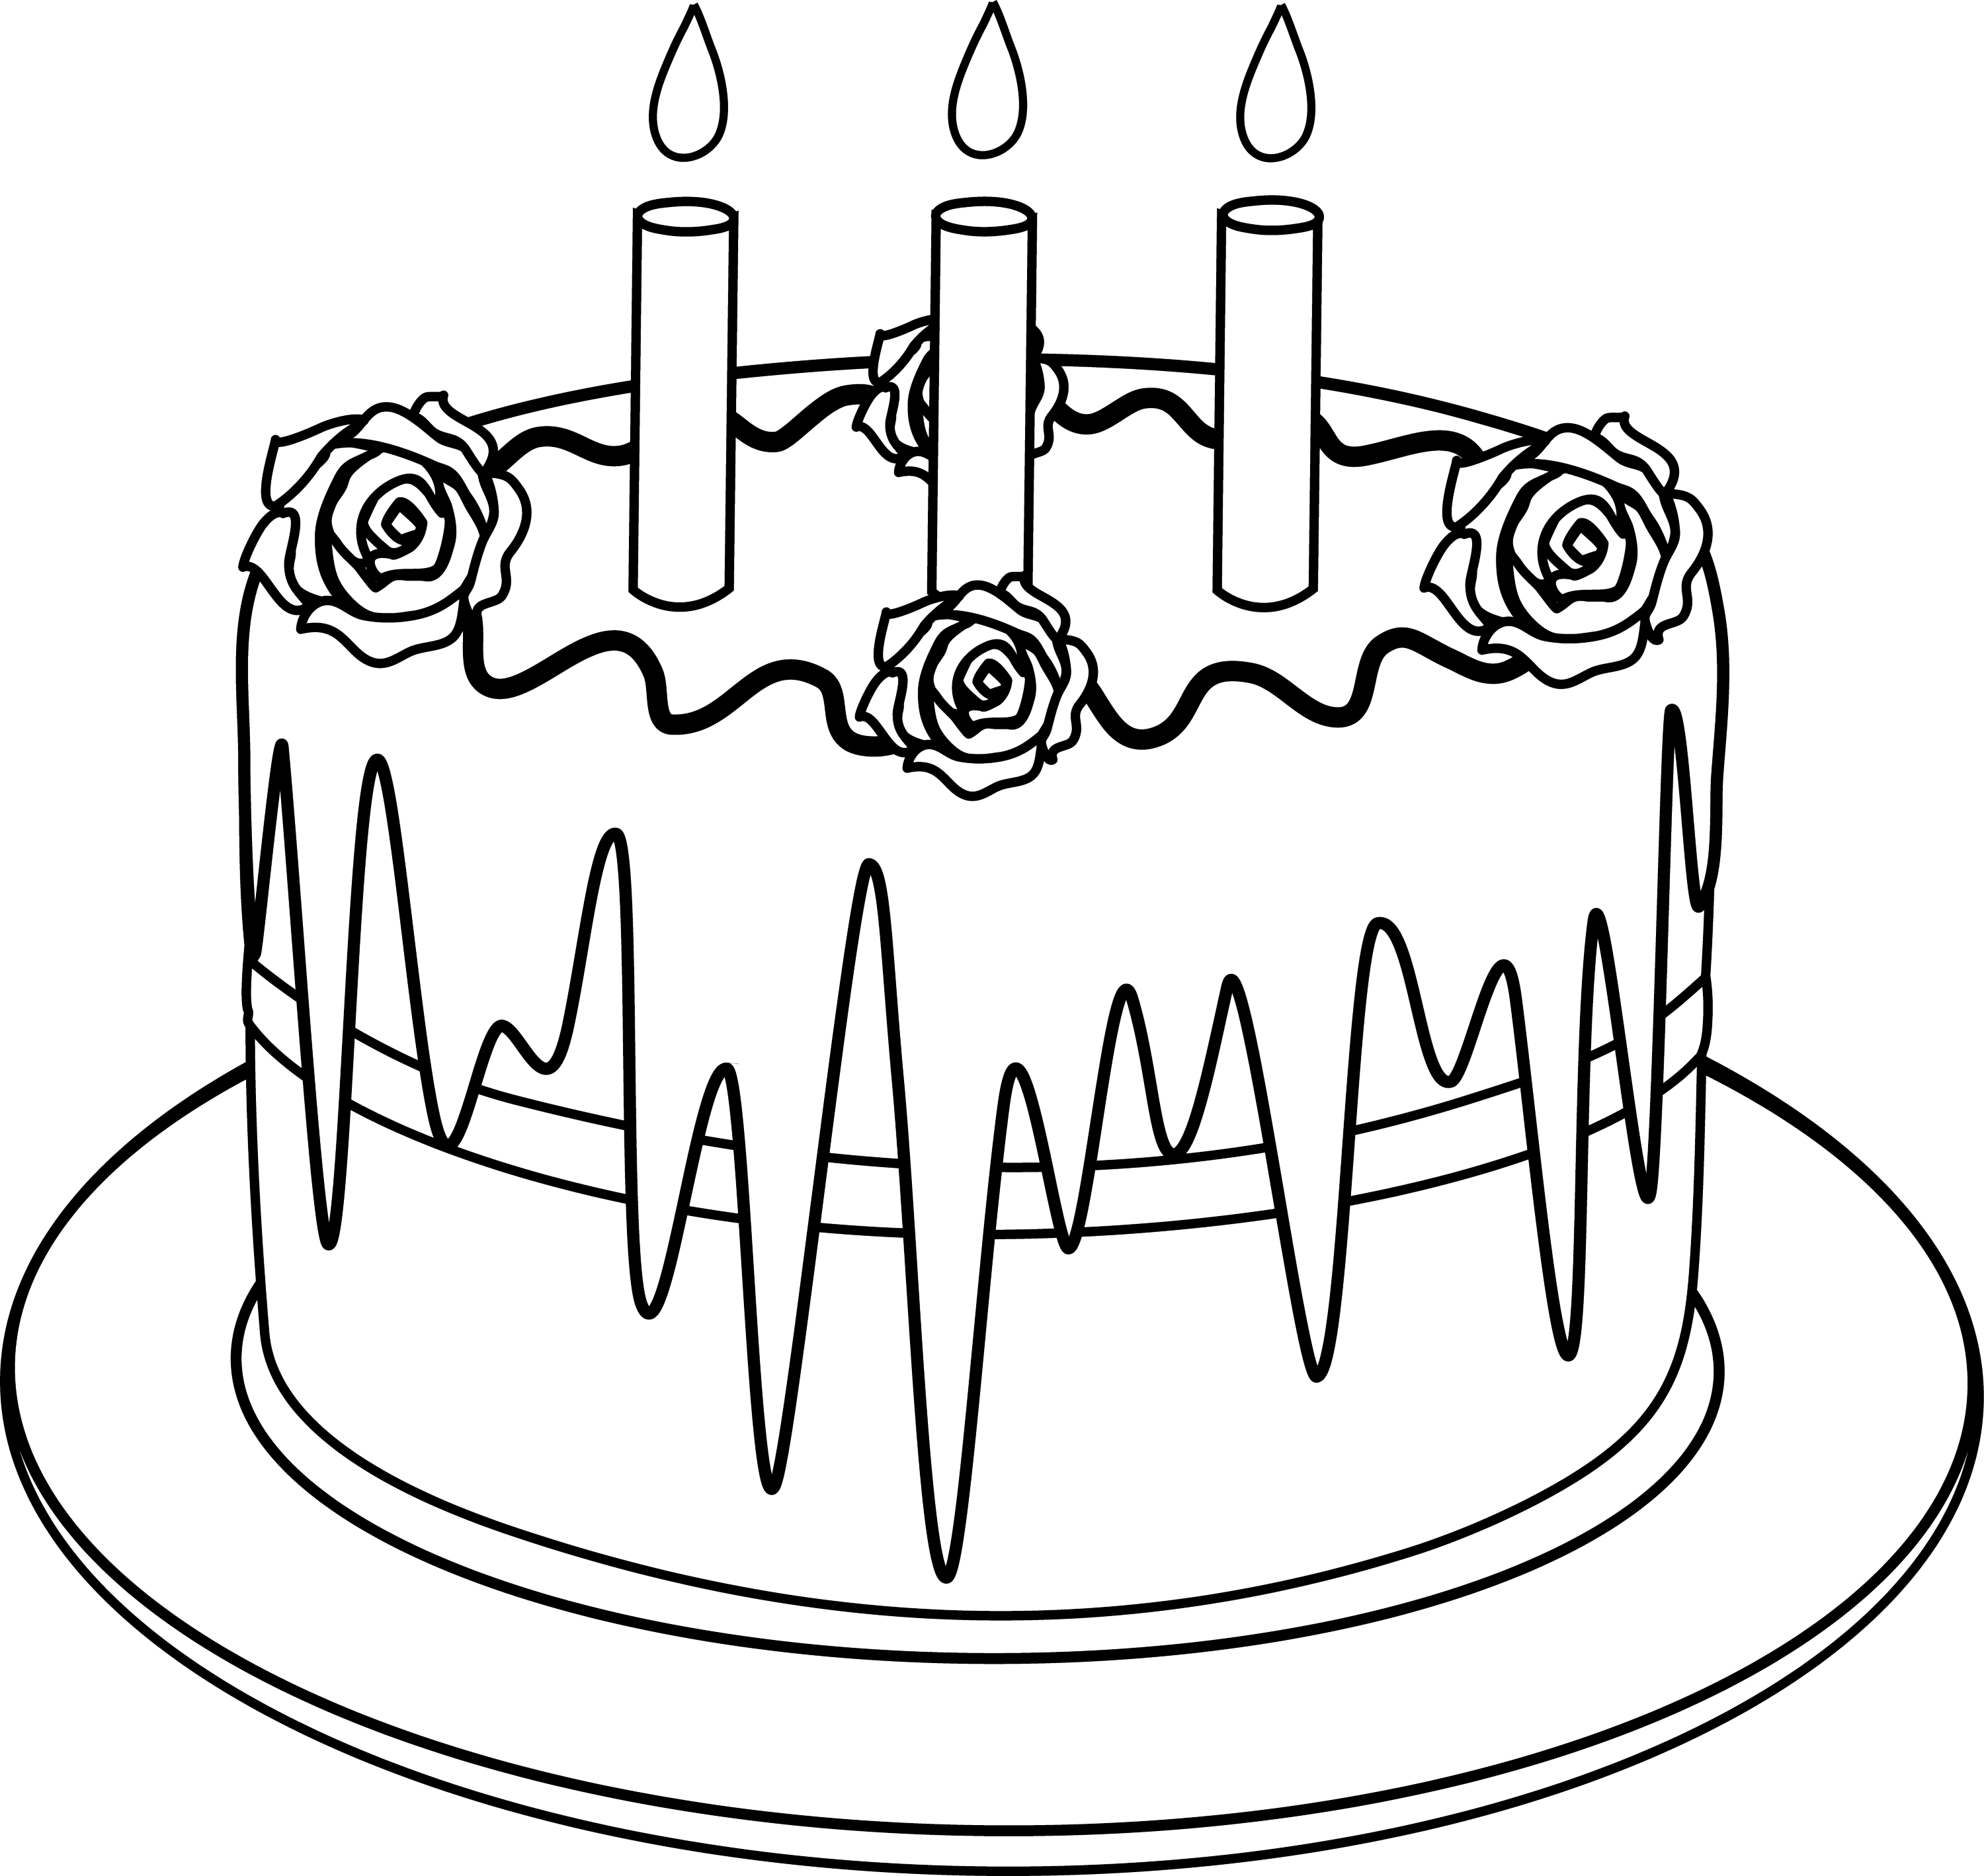 Download Colorable Line Art of Birthday Cake - Free Clip Art